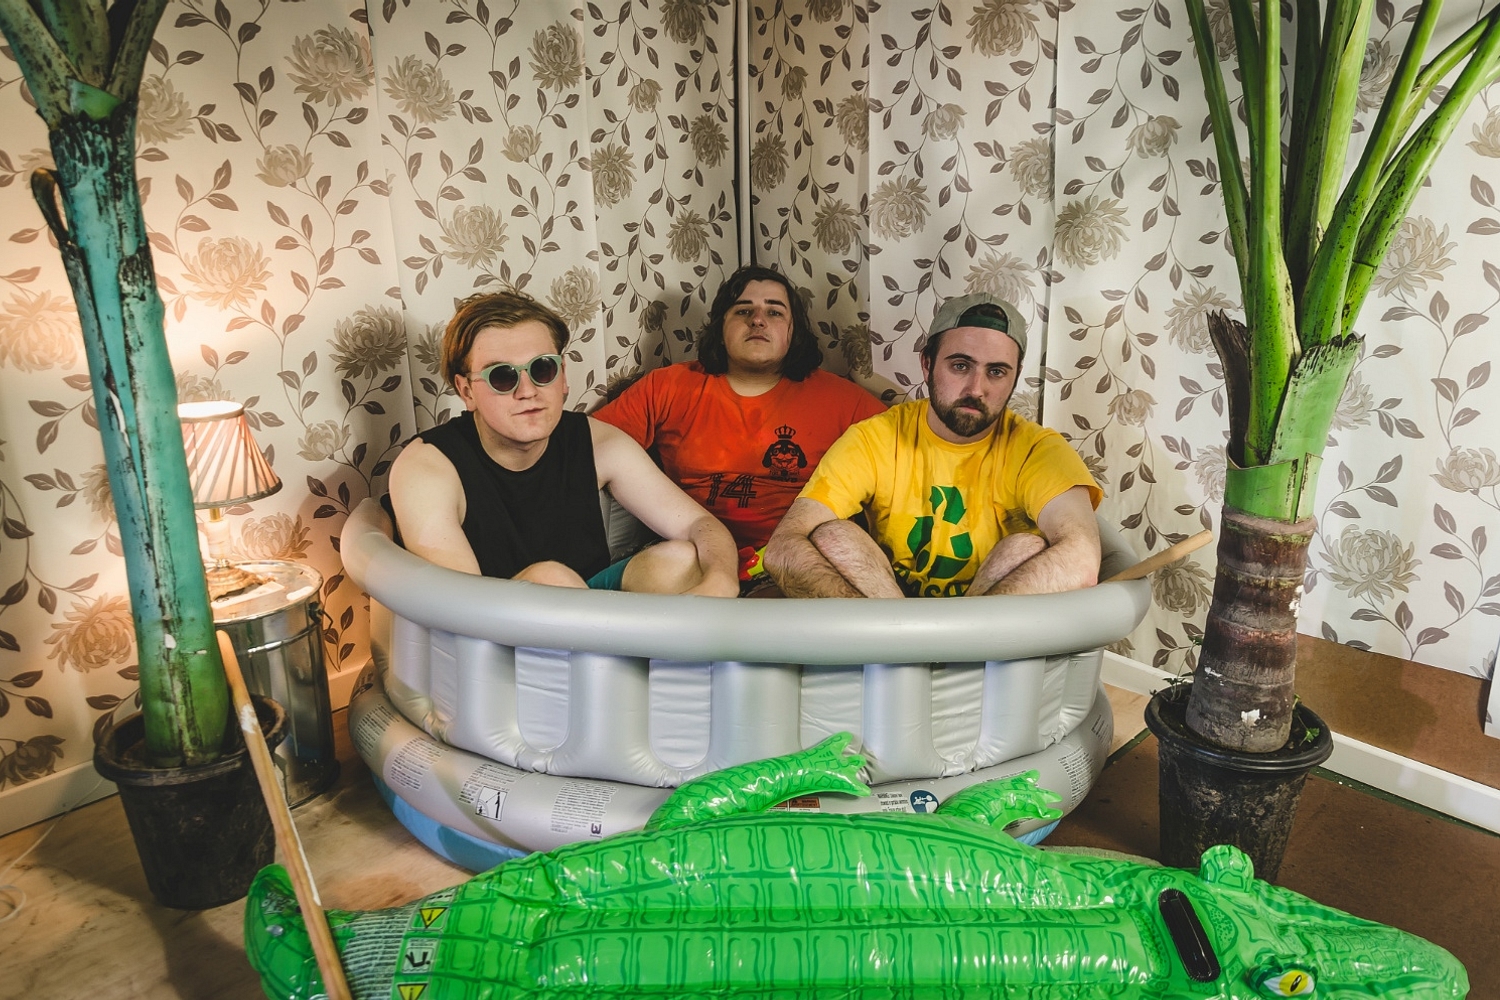 Forever Cult kick off the party with their fizzing ‘Tunnel Vision’ single